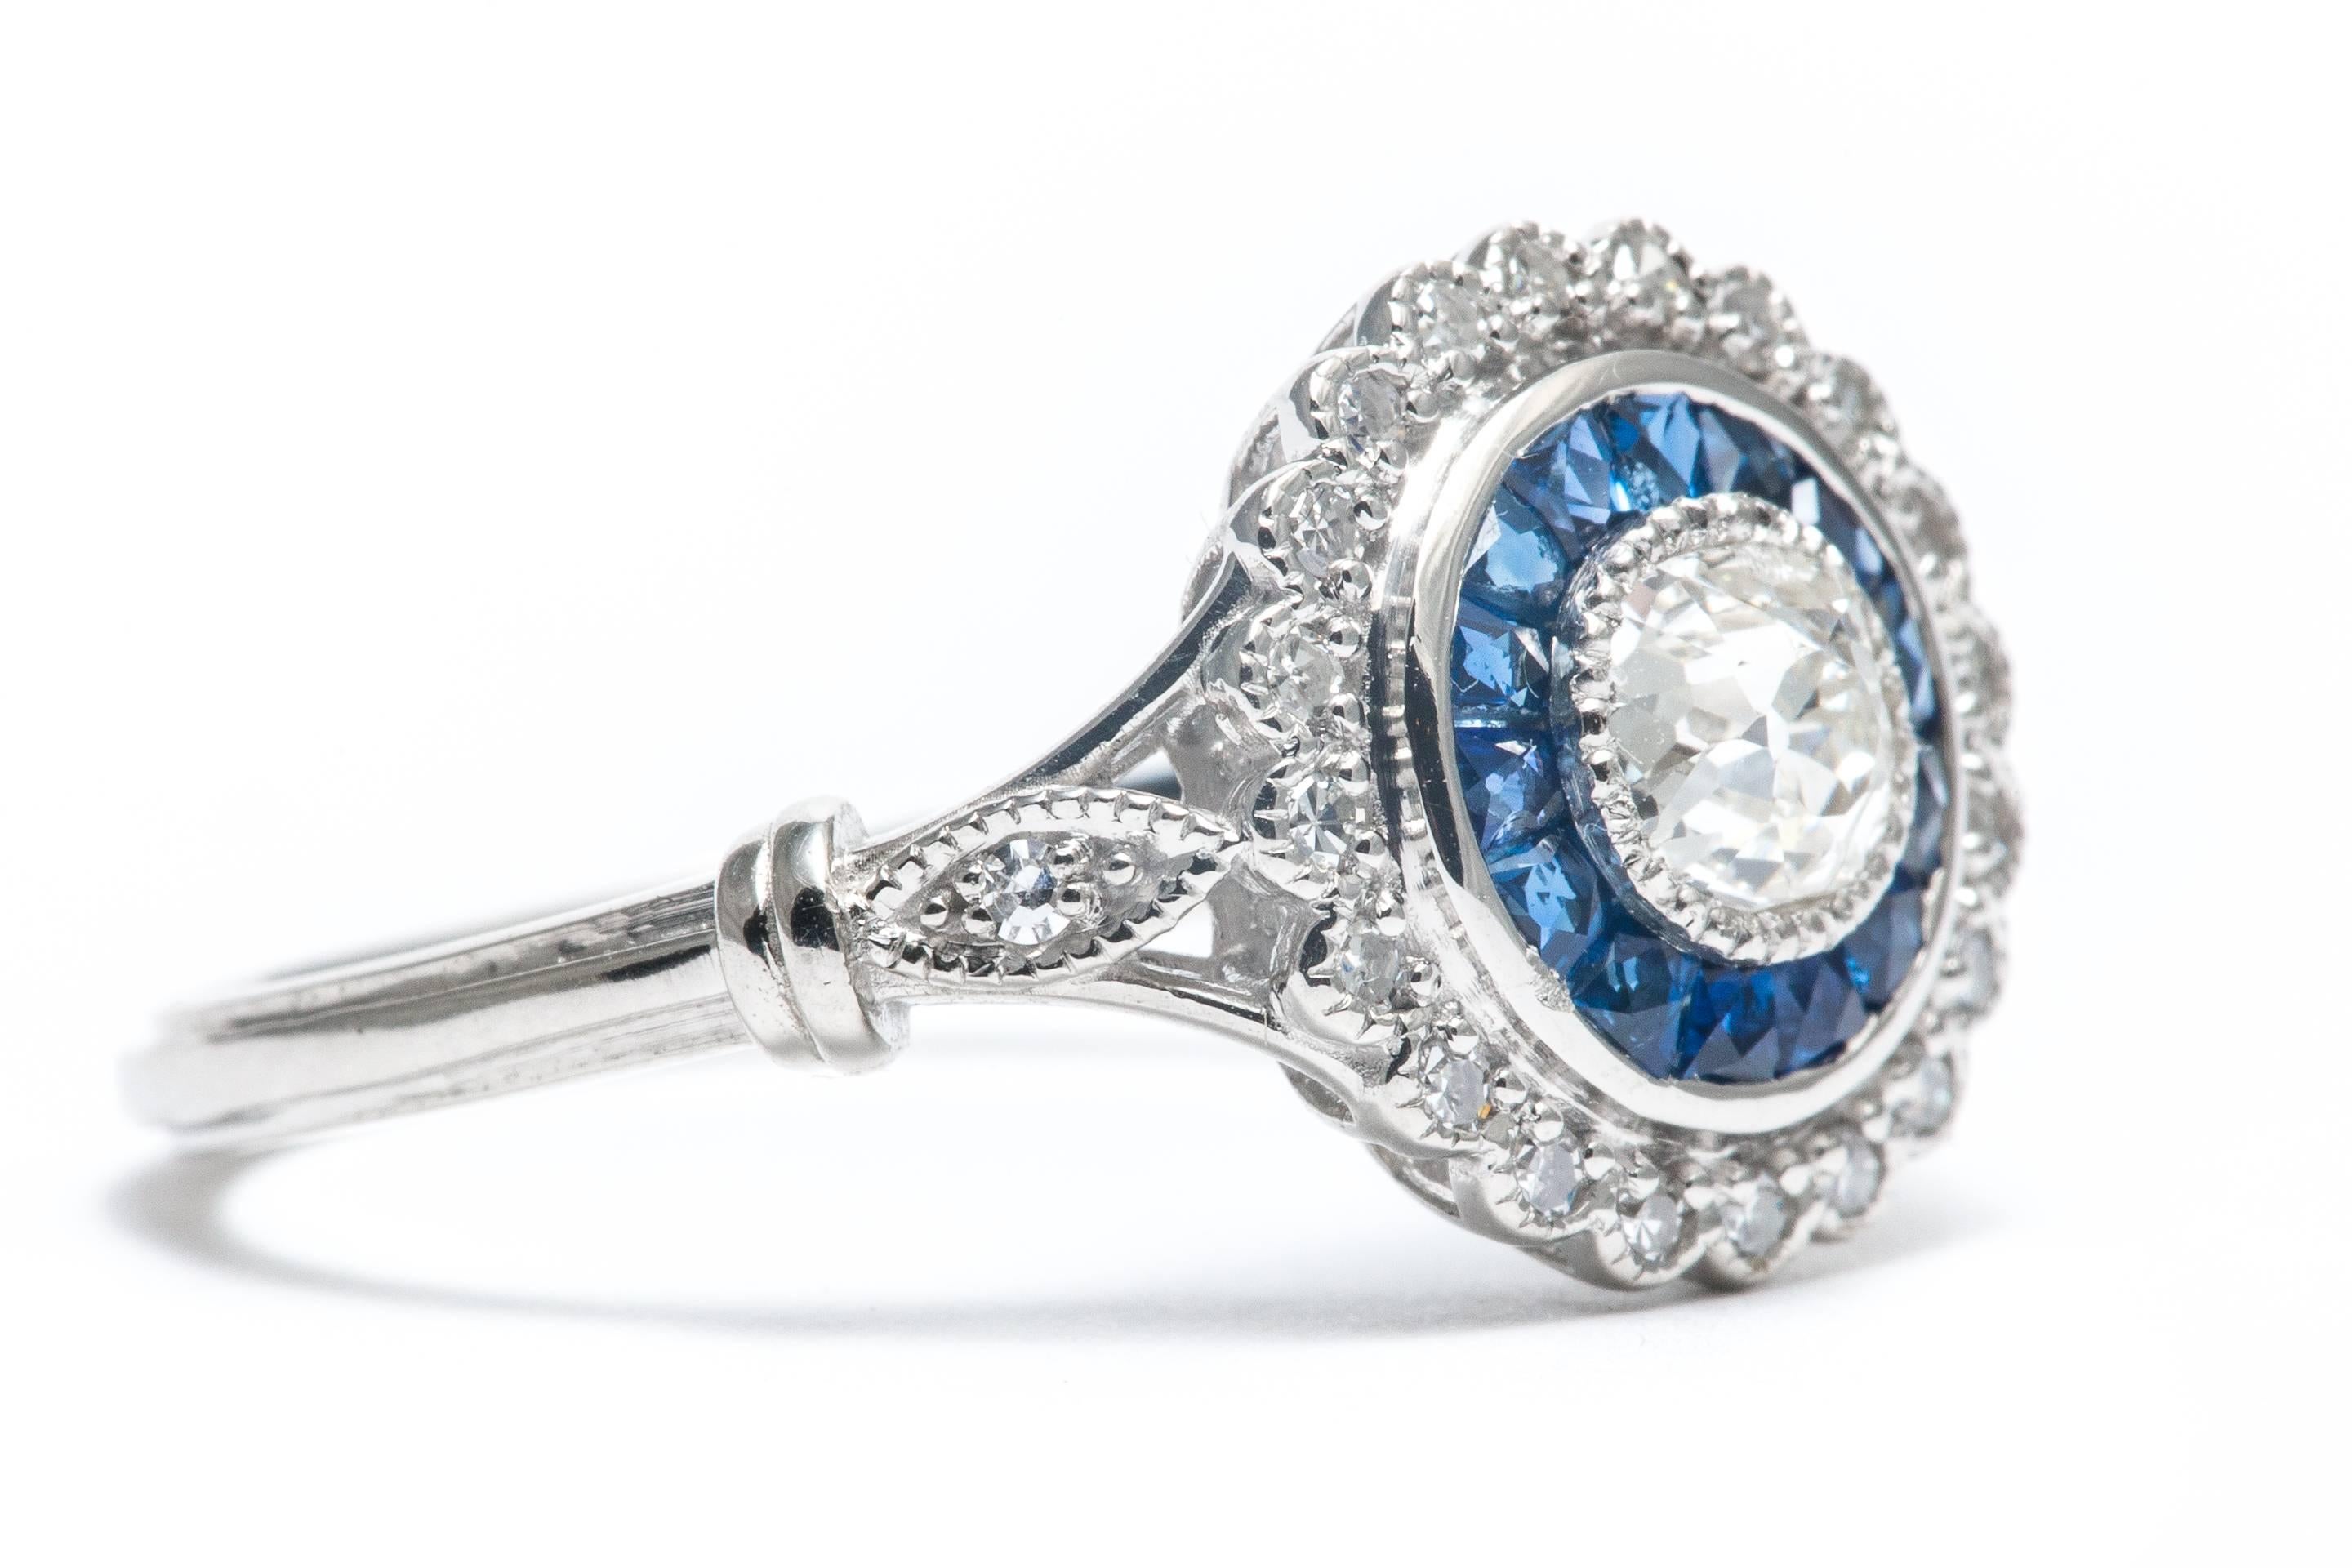 A beautiful handmade double halo style European cut diamond and French cut sapphire diamond engagement ring set in luxurious platinum.  Centered by a beautiful European cut diamond, this ring features a halo of French cut sapphires followed by yet